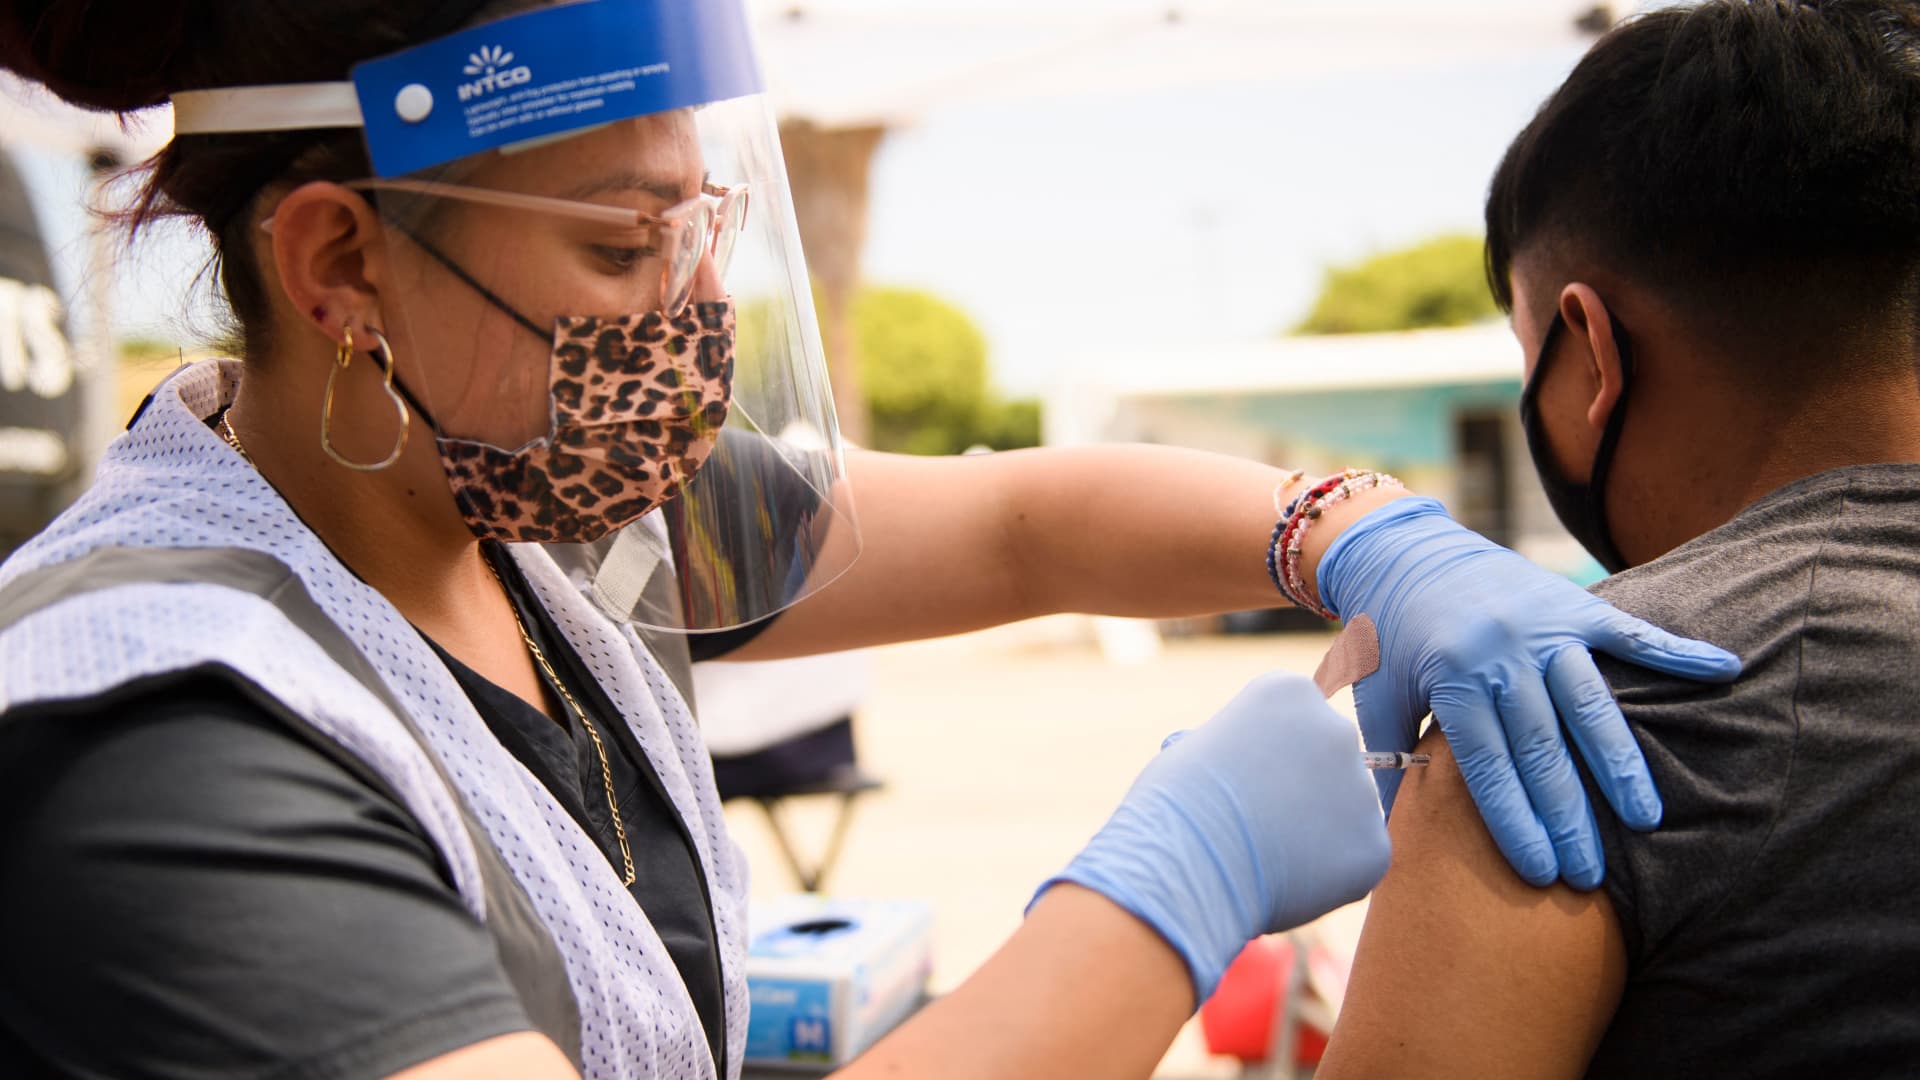 A 17-year-old receives a first dose of the Pfizer Covid-19 vaccine at a mobile vaccination clinic during a back to school event offering school supplies, Covid-19 vaccinations, face masks, and other resources for children and their families at the Weingart East Los Angeles YMCA in Los Angeles, California on August 7, 2021.